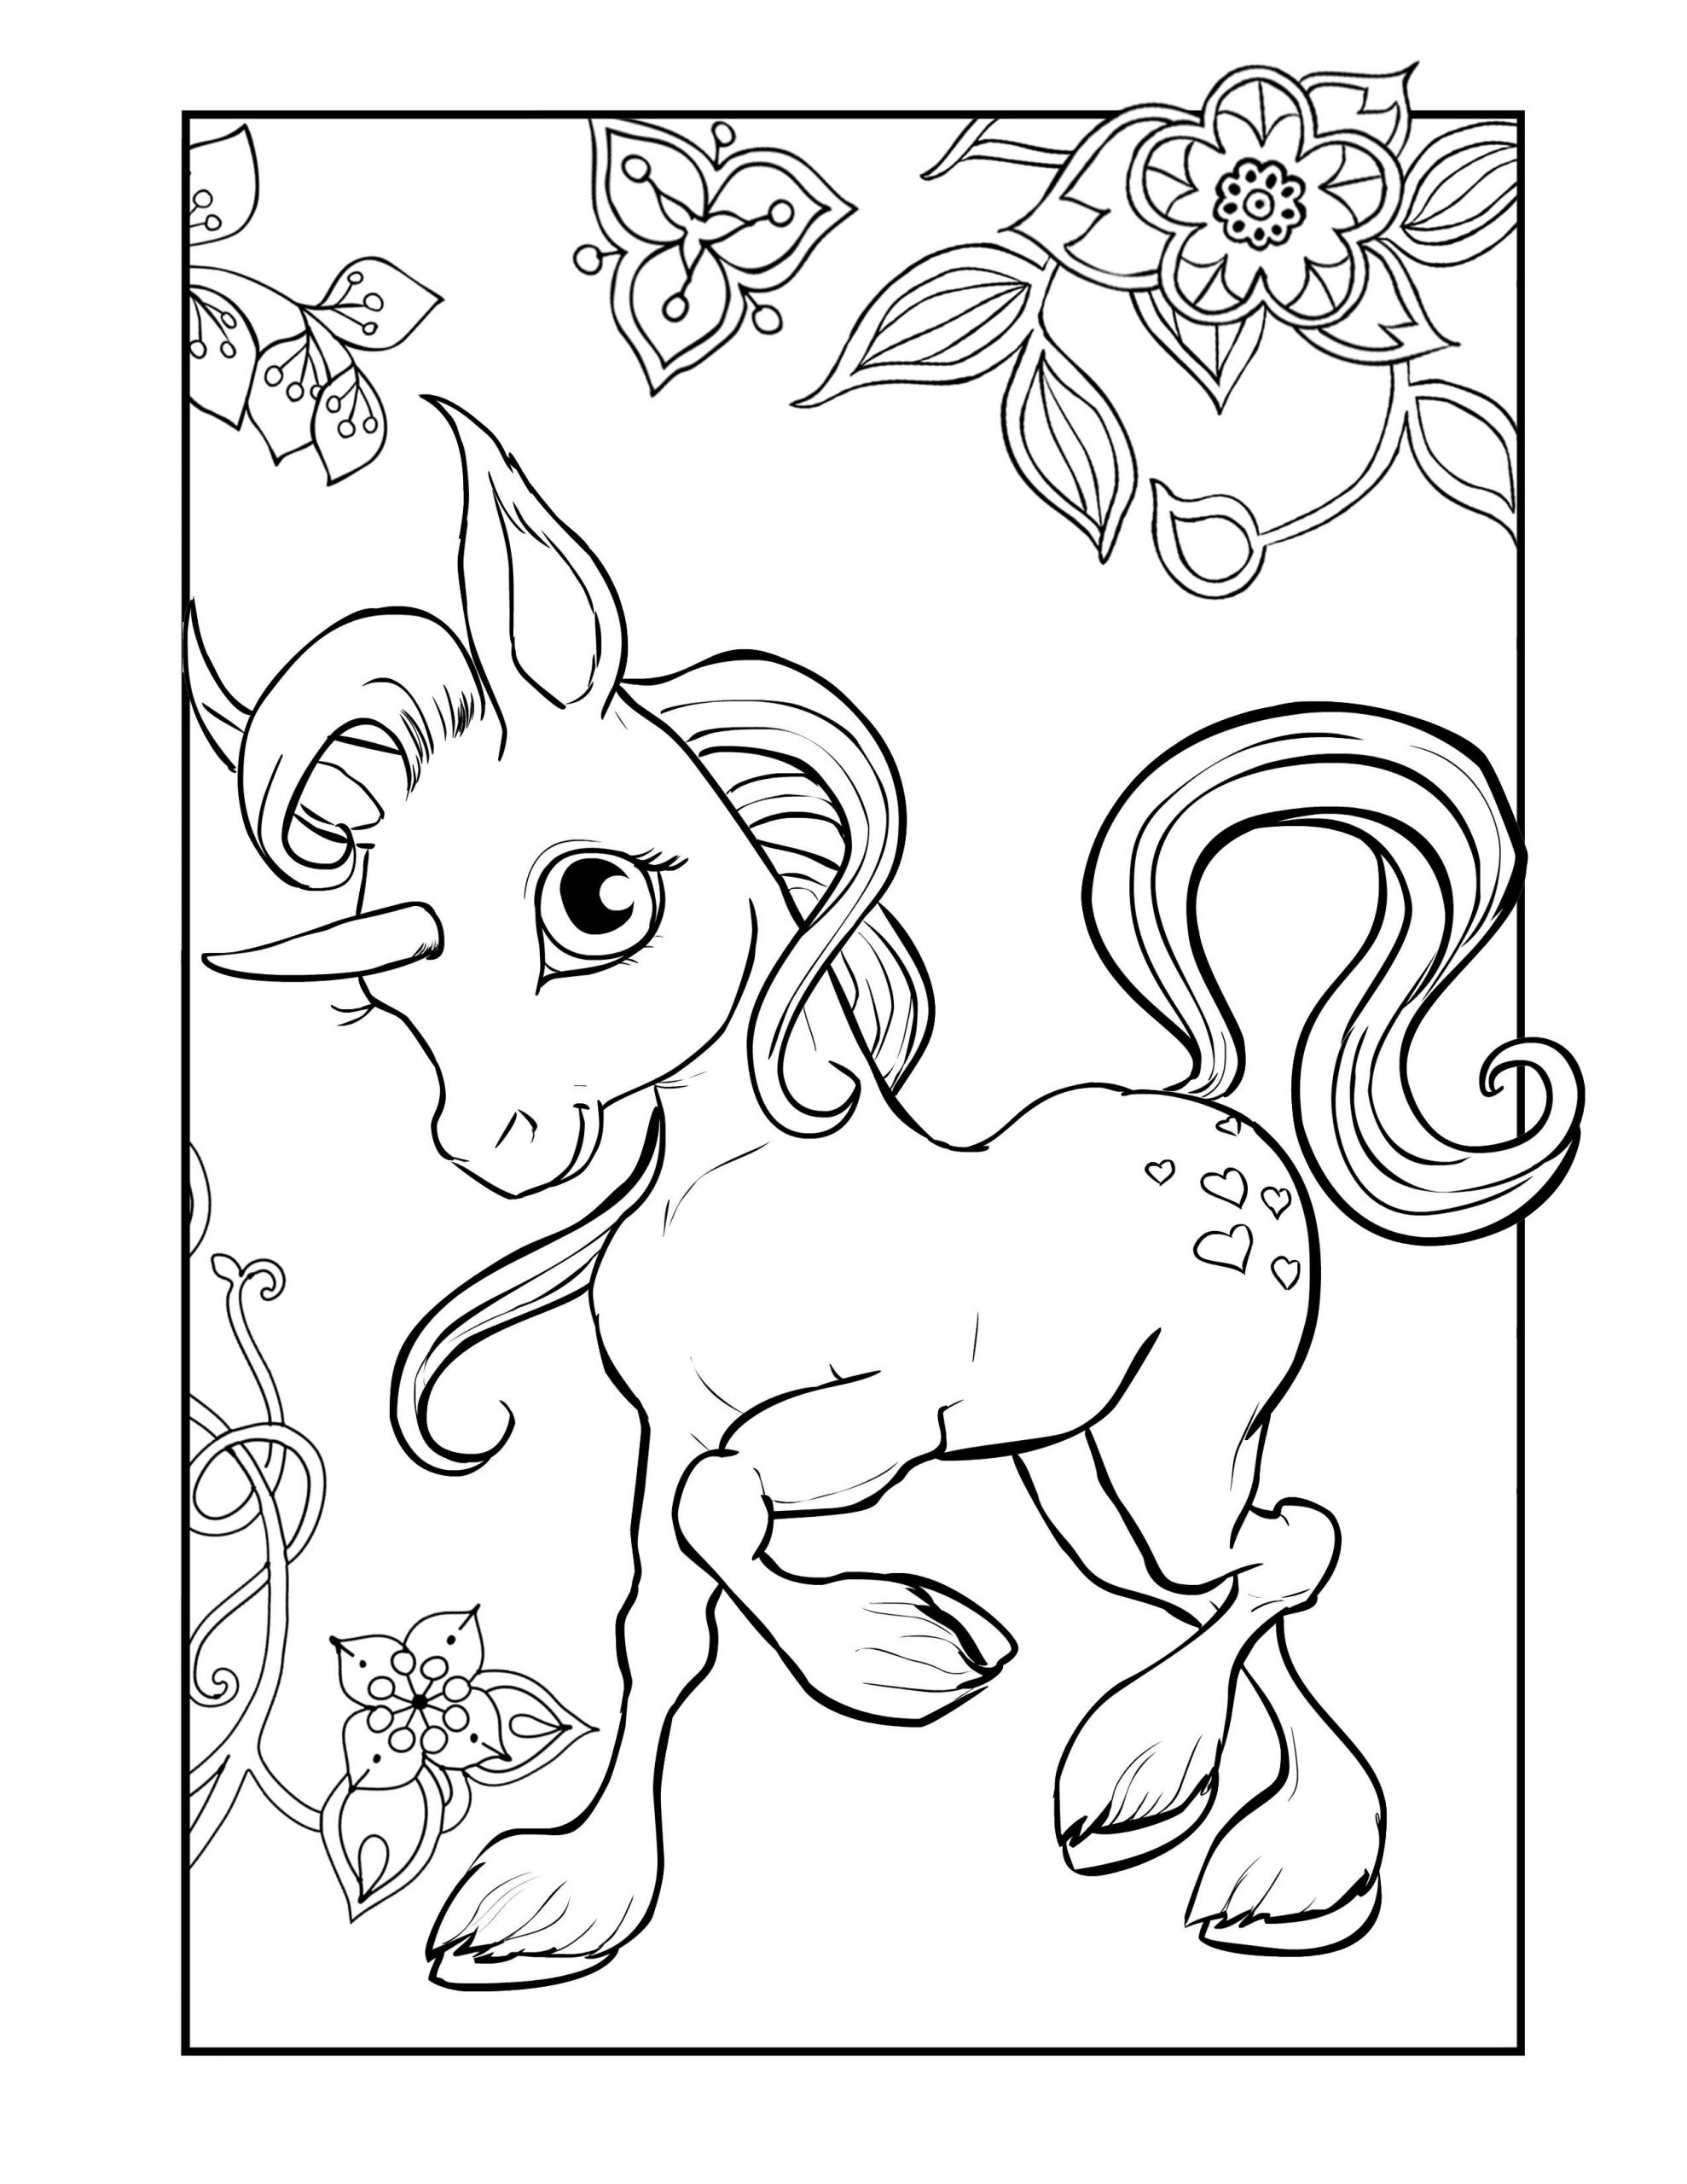 Download Top 25 Unicorn Coloring Pages for Girls - Home, Family, Style and Art Ideas